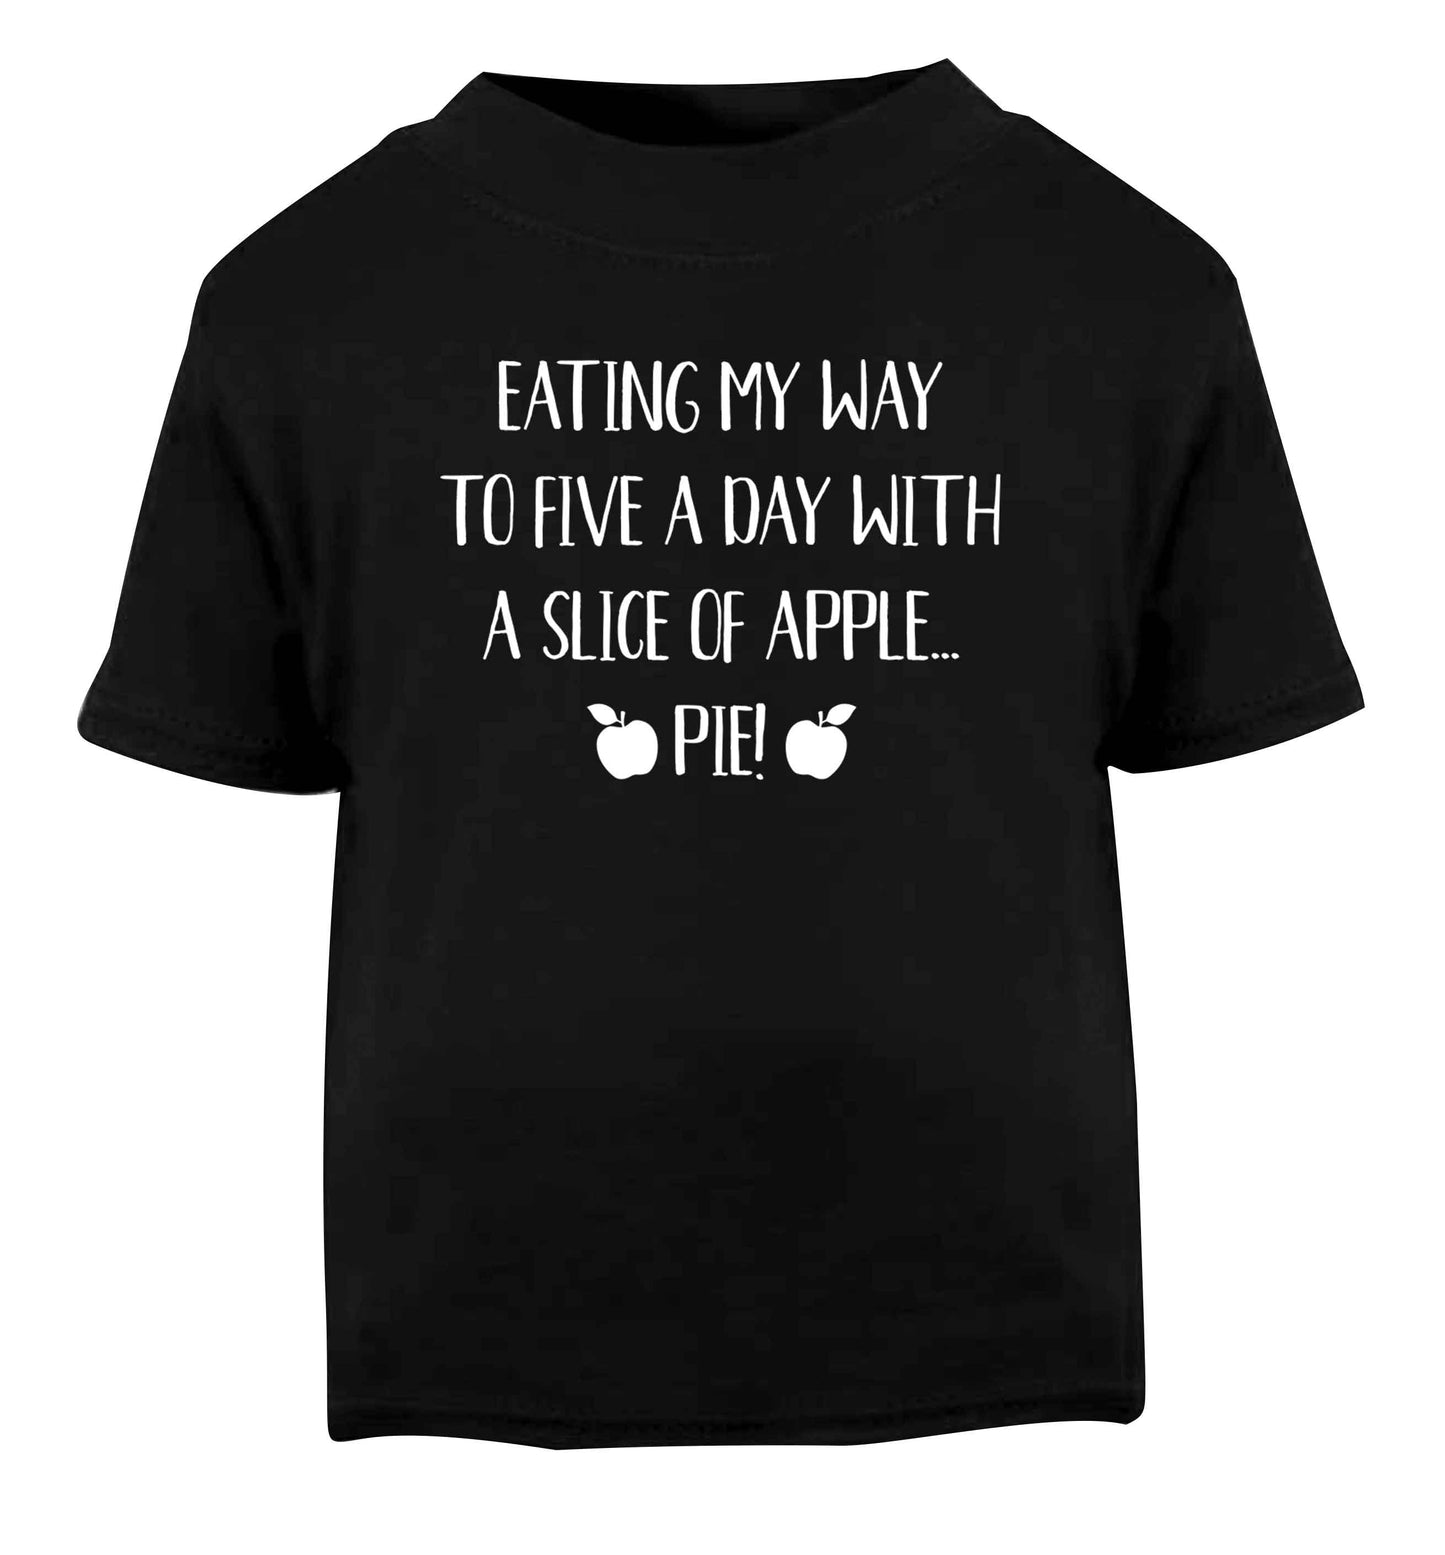 Eating my way to five a day with a slice of apple pie Black Baby Toddler Tshirt 2 years